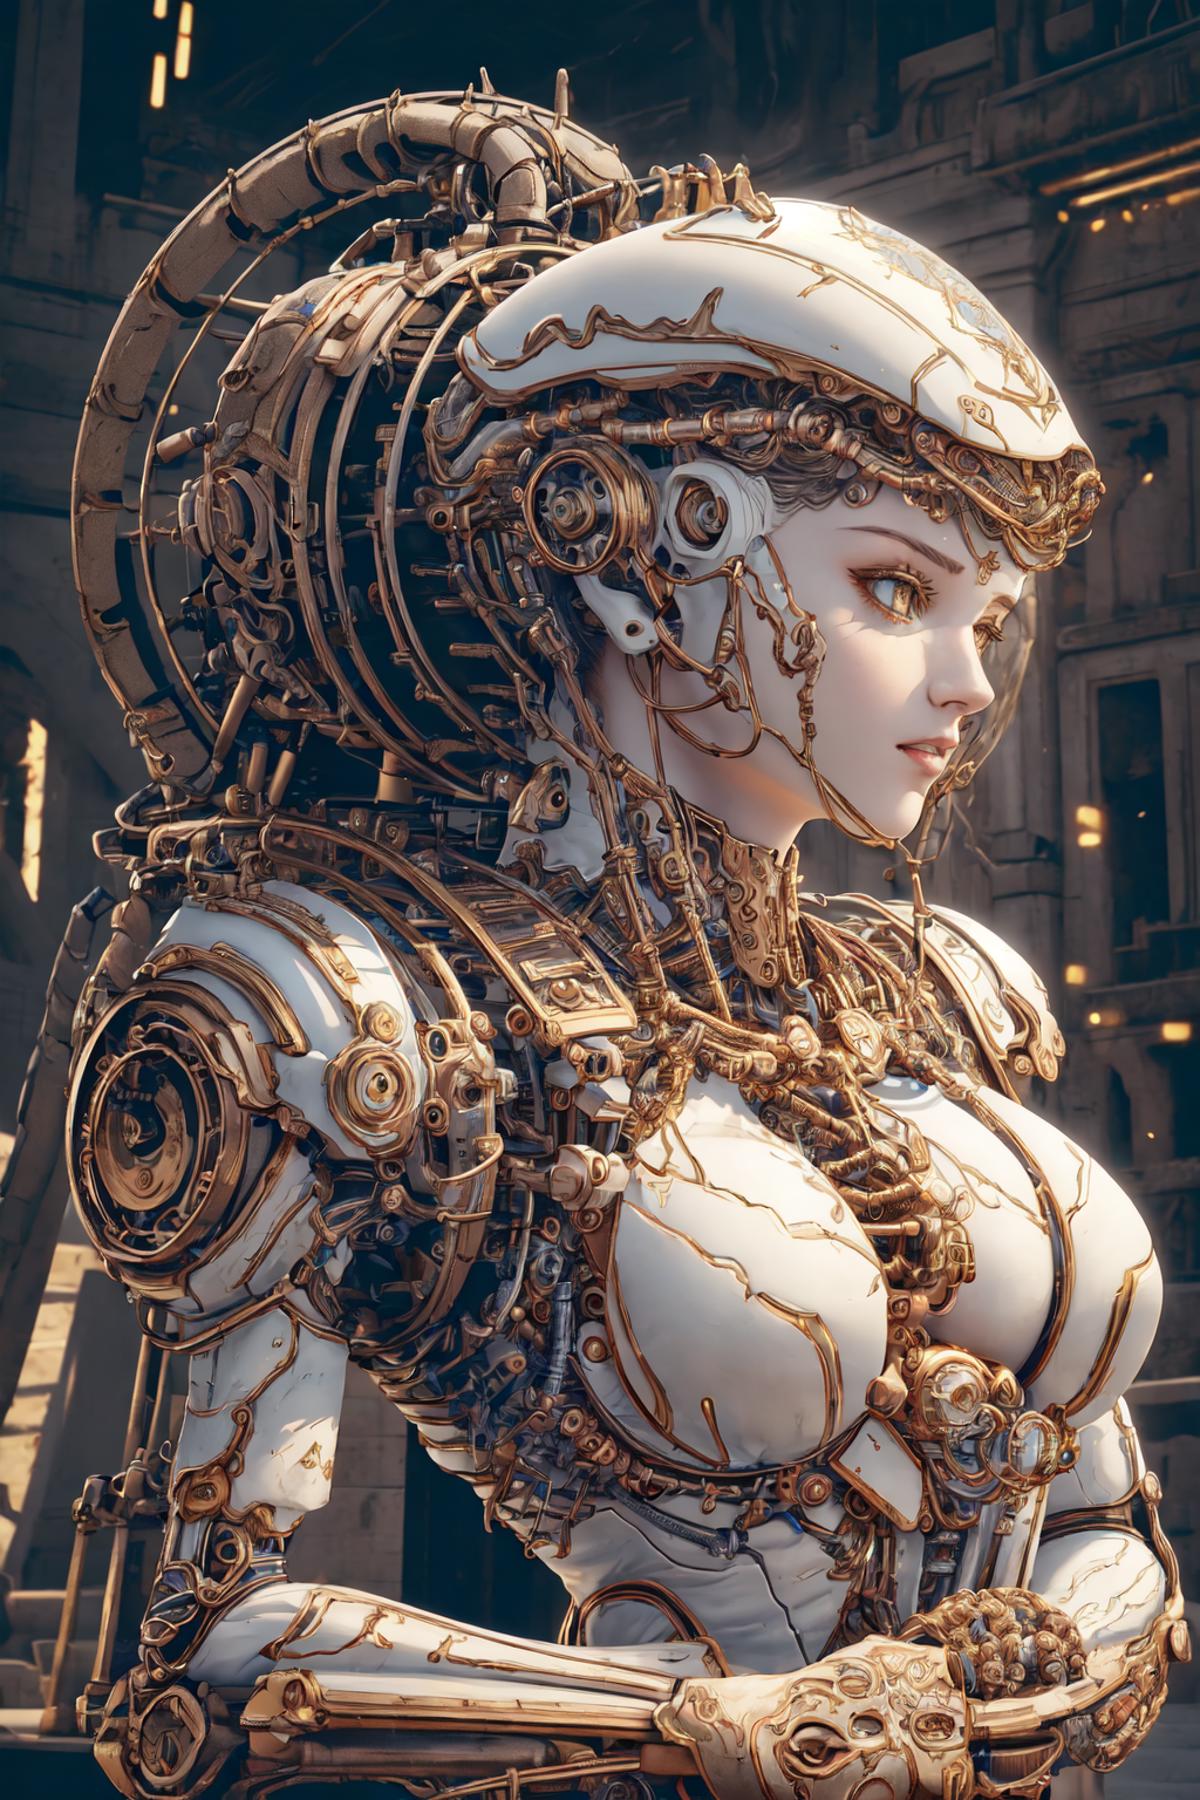 Anime-style robot woman with gold armor and glowing eyes.